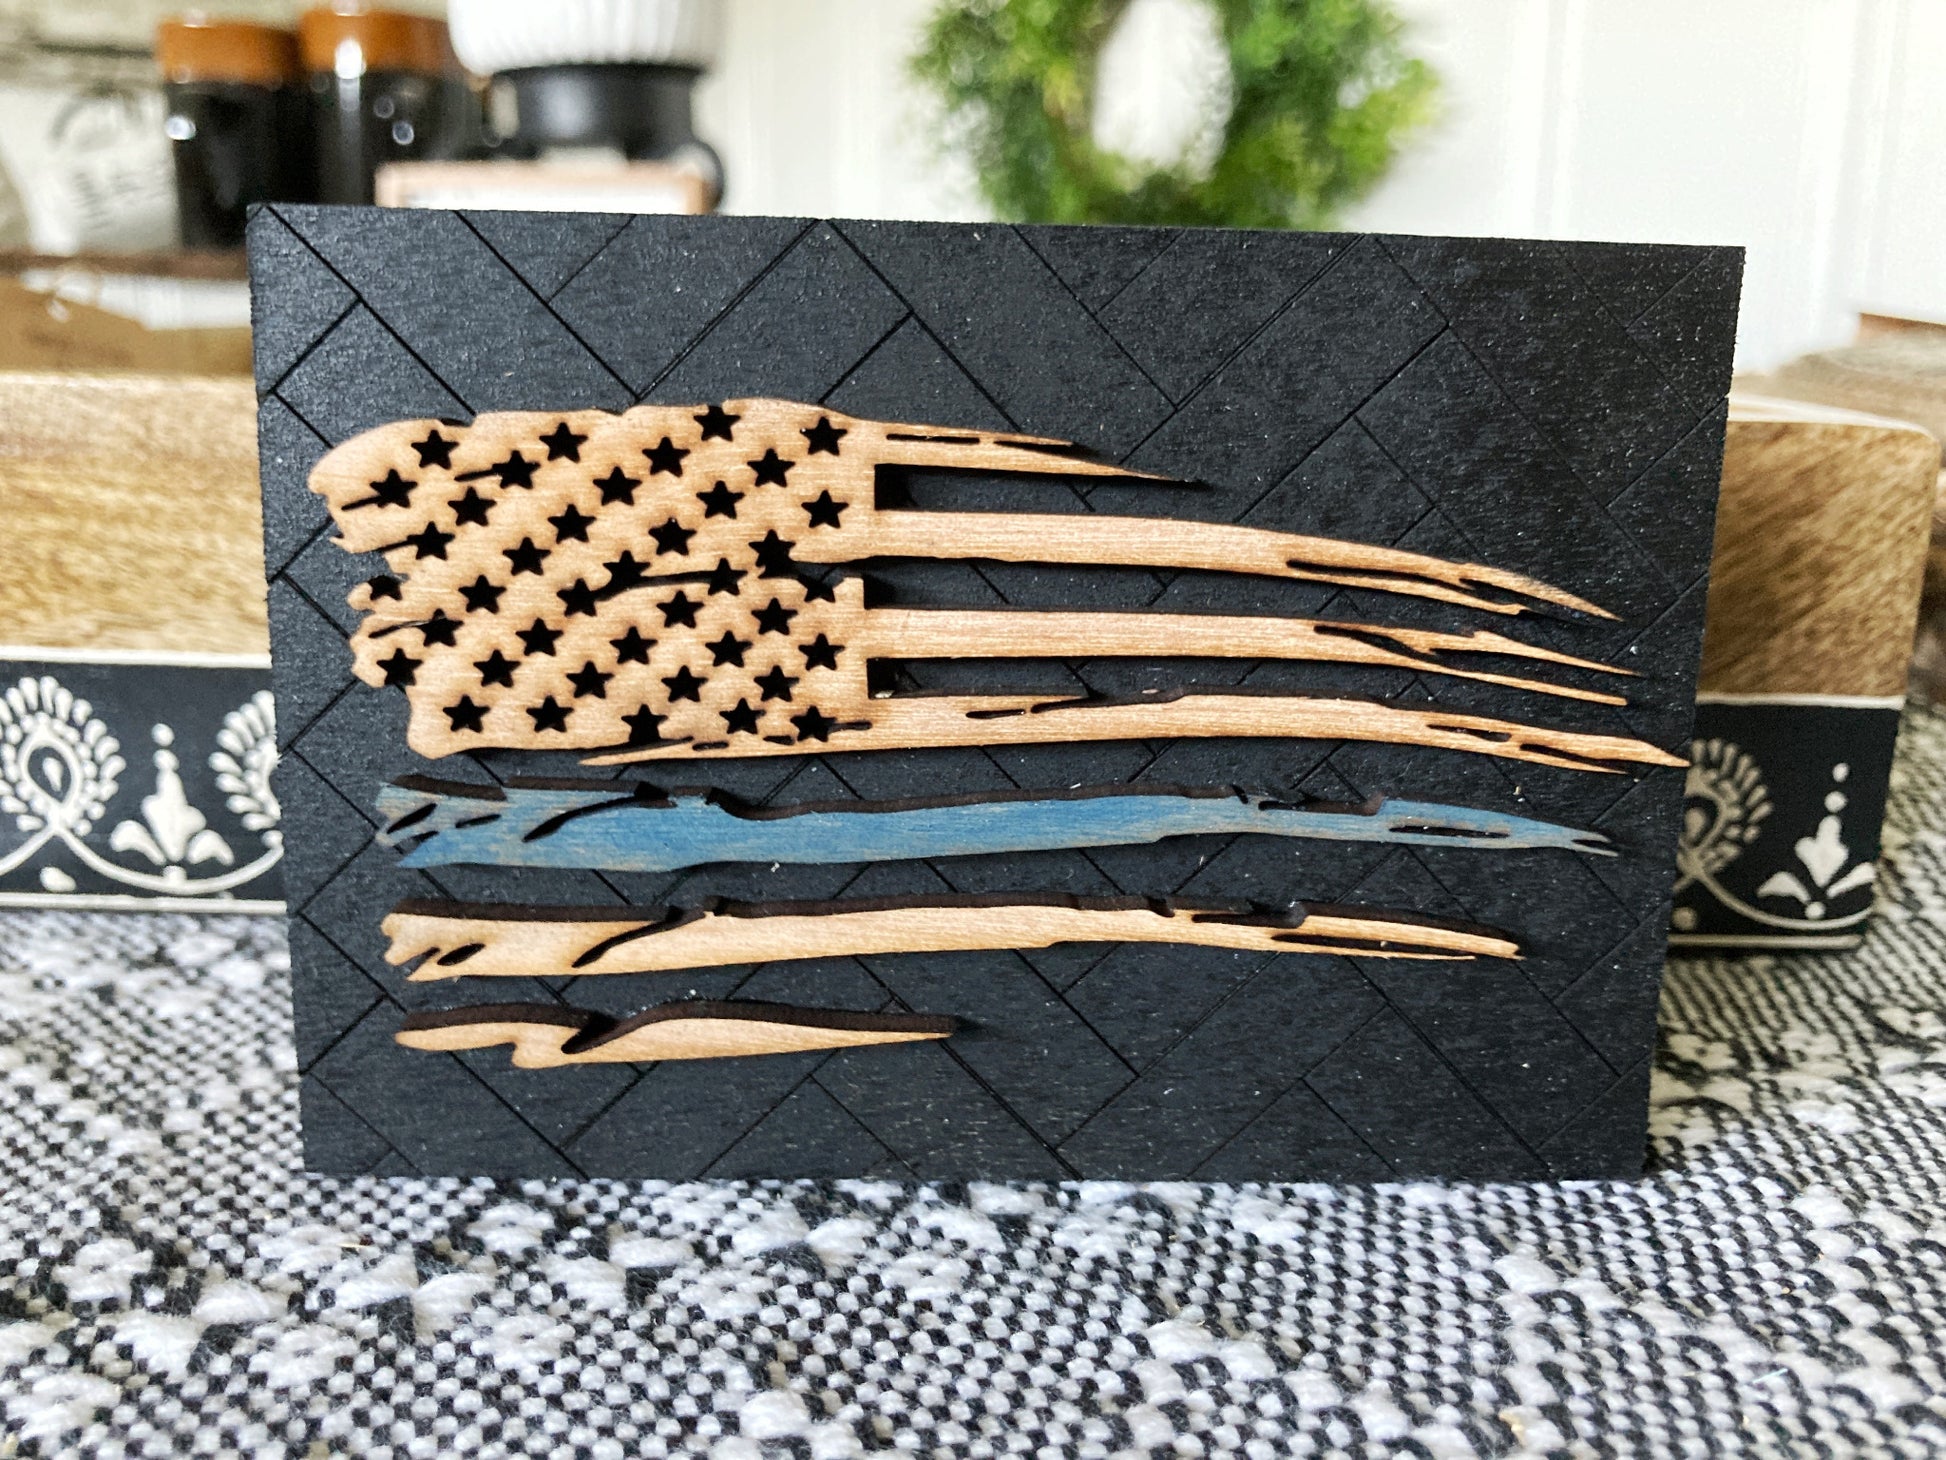 Small sign with an engraved herringbone pattern in the painted black wood background.  The natural wood tattered flag had a thin blue line to support the police is attached to the background